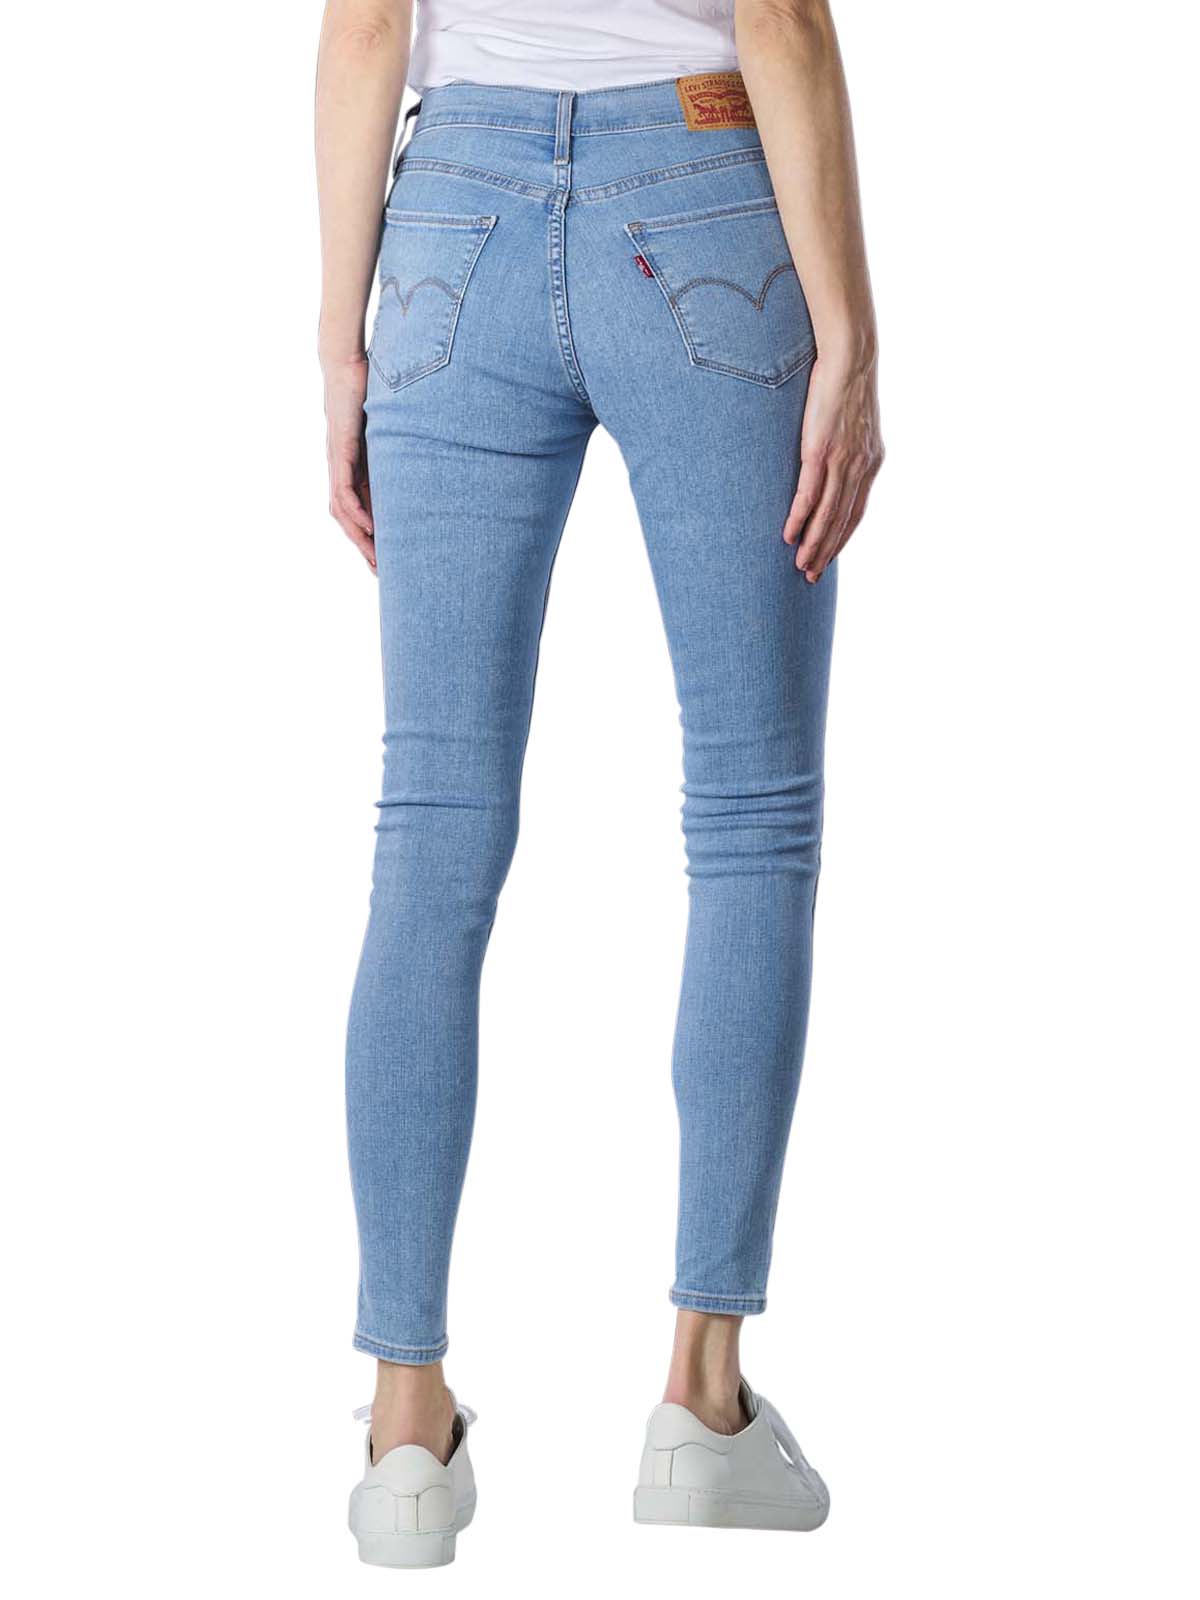 Levi's 720 Jeans High Rise Super Skinny ontario noise Levi's Women's Jeans  | Free Shipping on  - SIMPLY LOOK GOOD